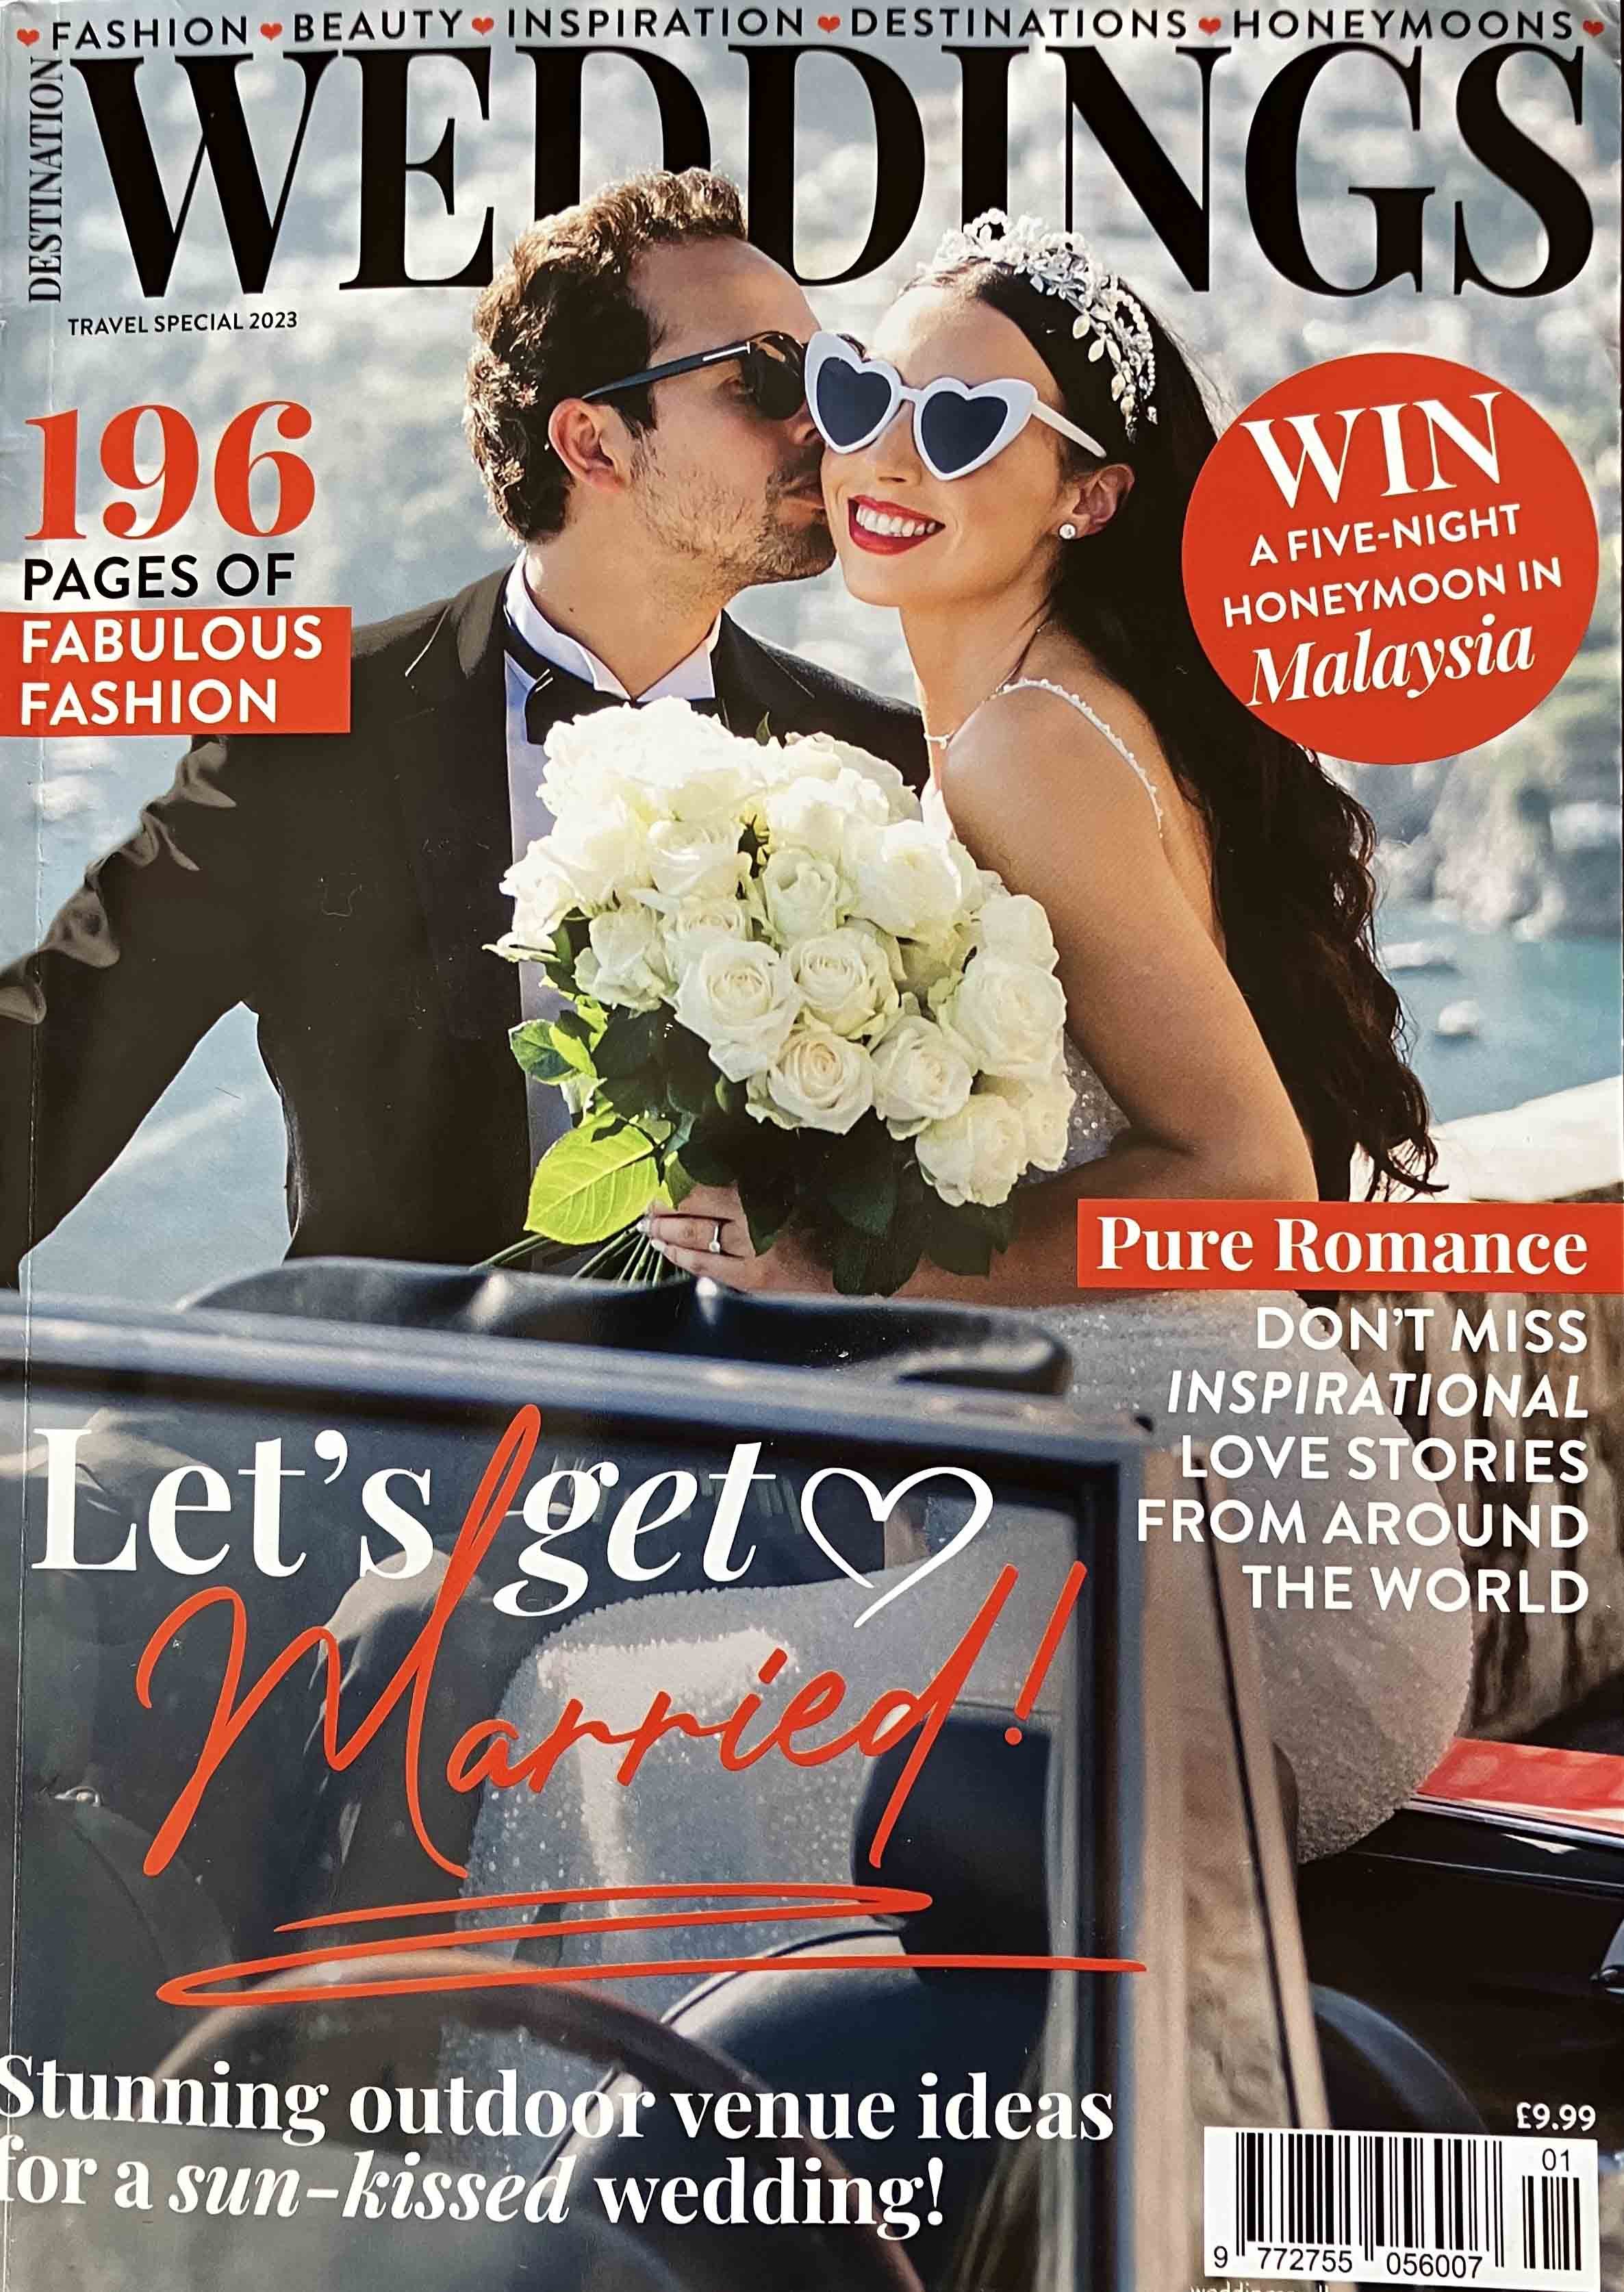 The cover of weddings magazine with a couple sitting on top of a car and holding a bouquette.